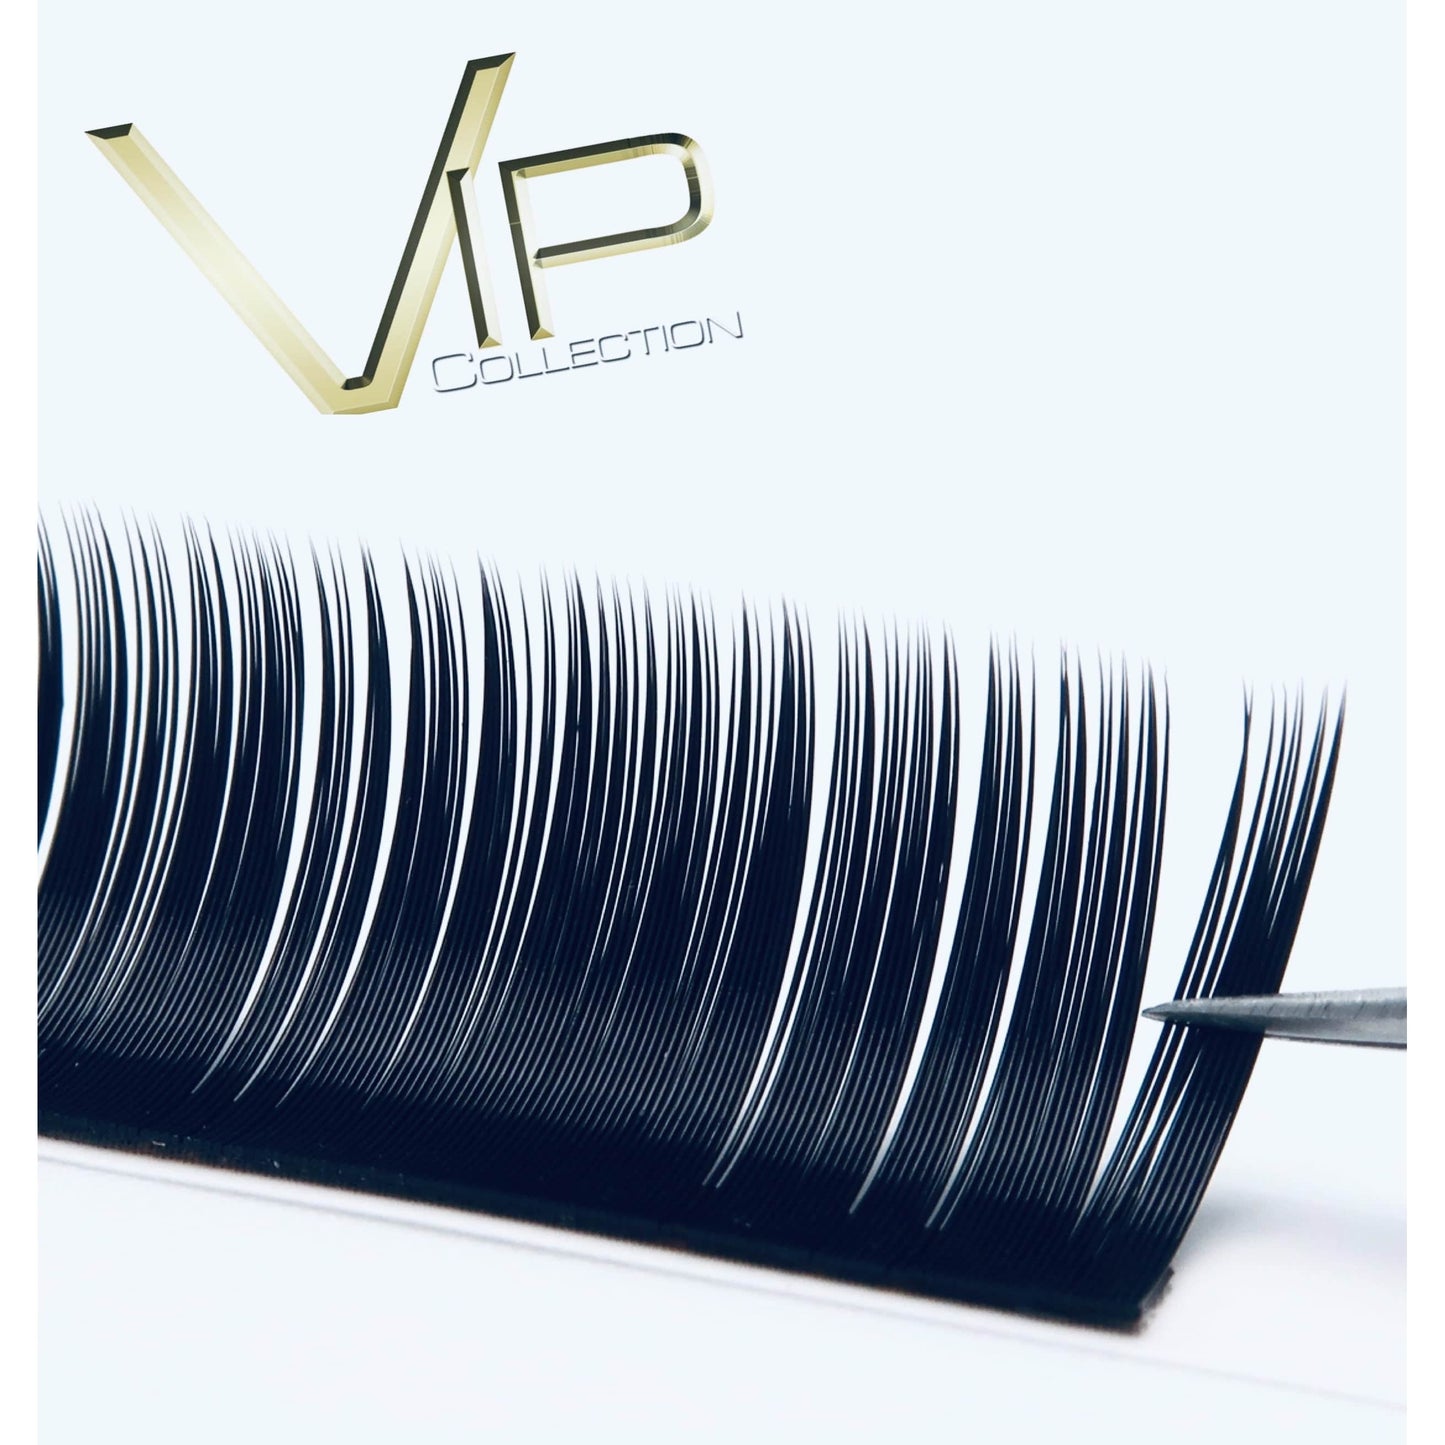 VIP Eyelashes - New Cuticle Lash Extension 12 Lines - VIP Extensions